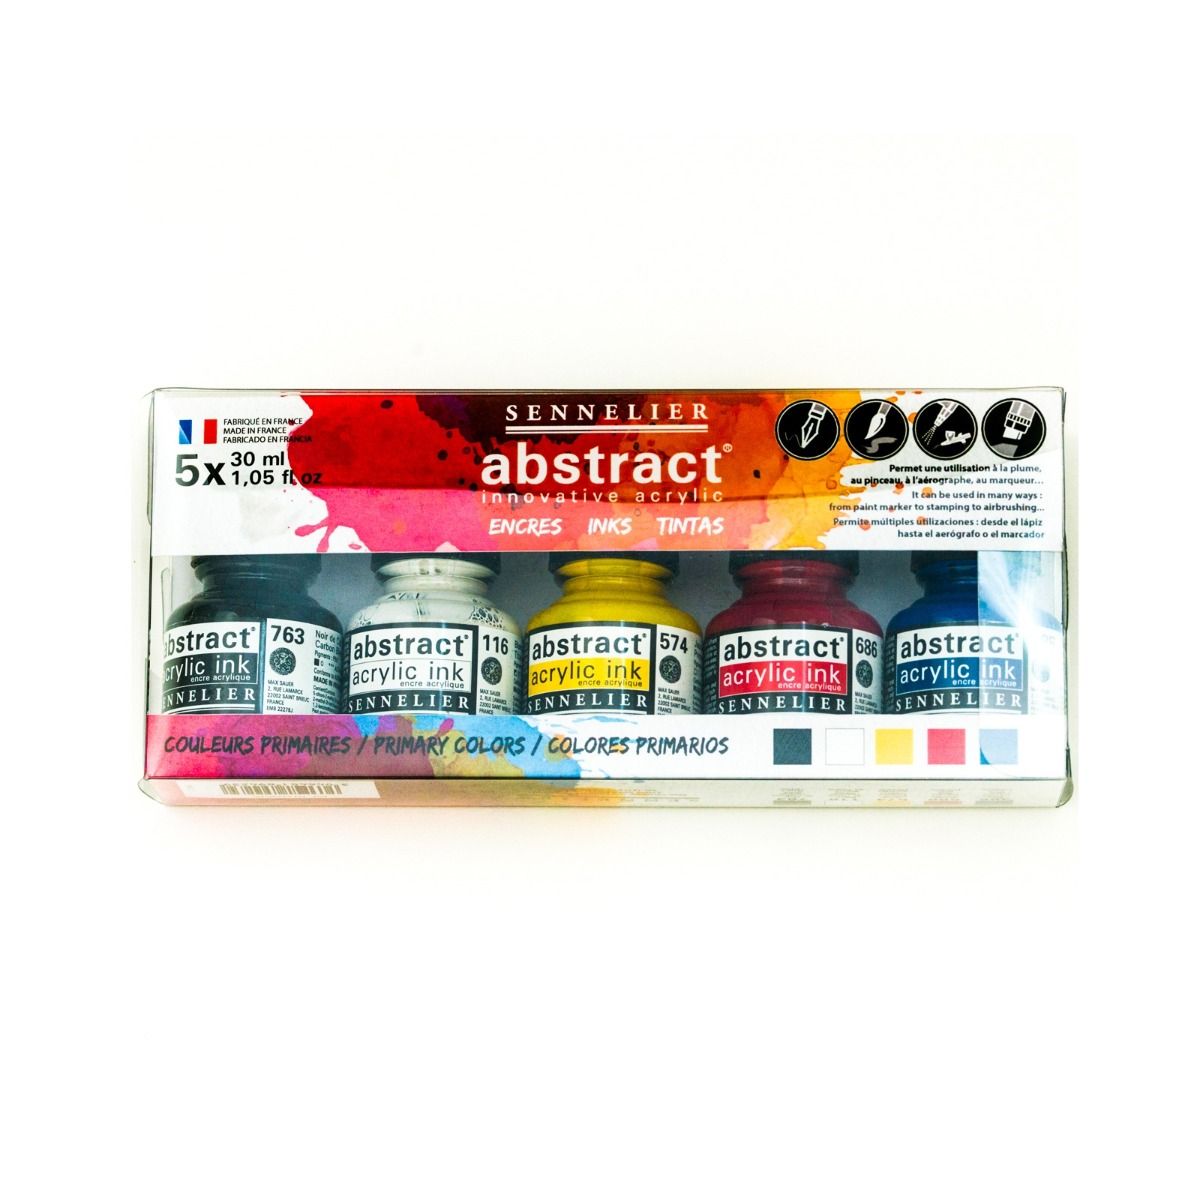 Sennelier Abstract Acrylic Inks and Set Of 5 x 30 ml